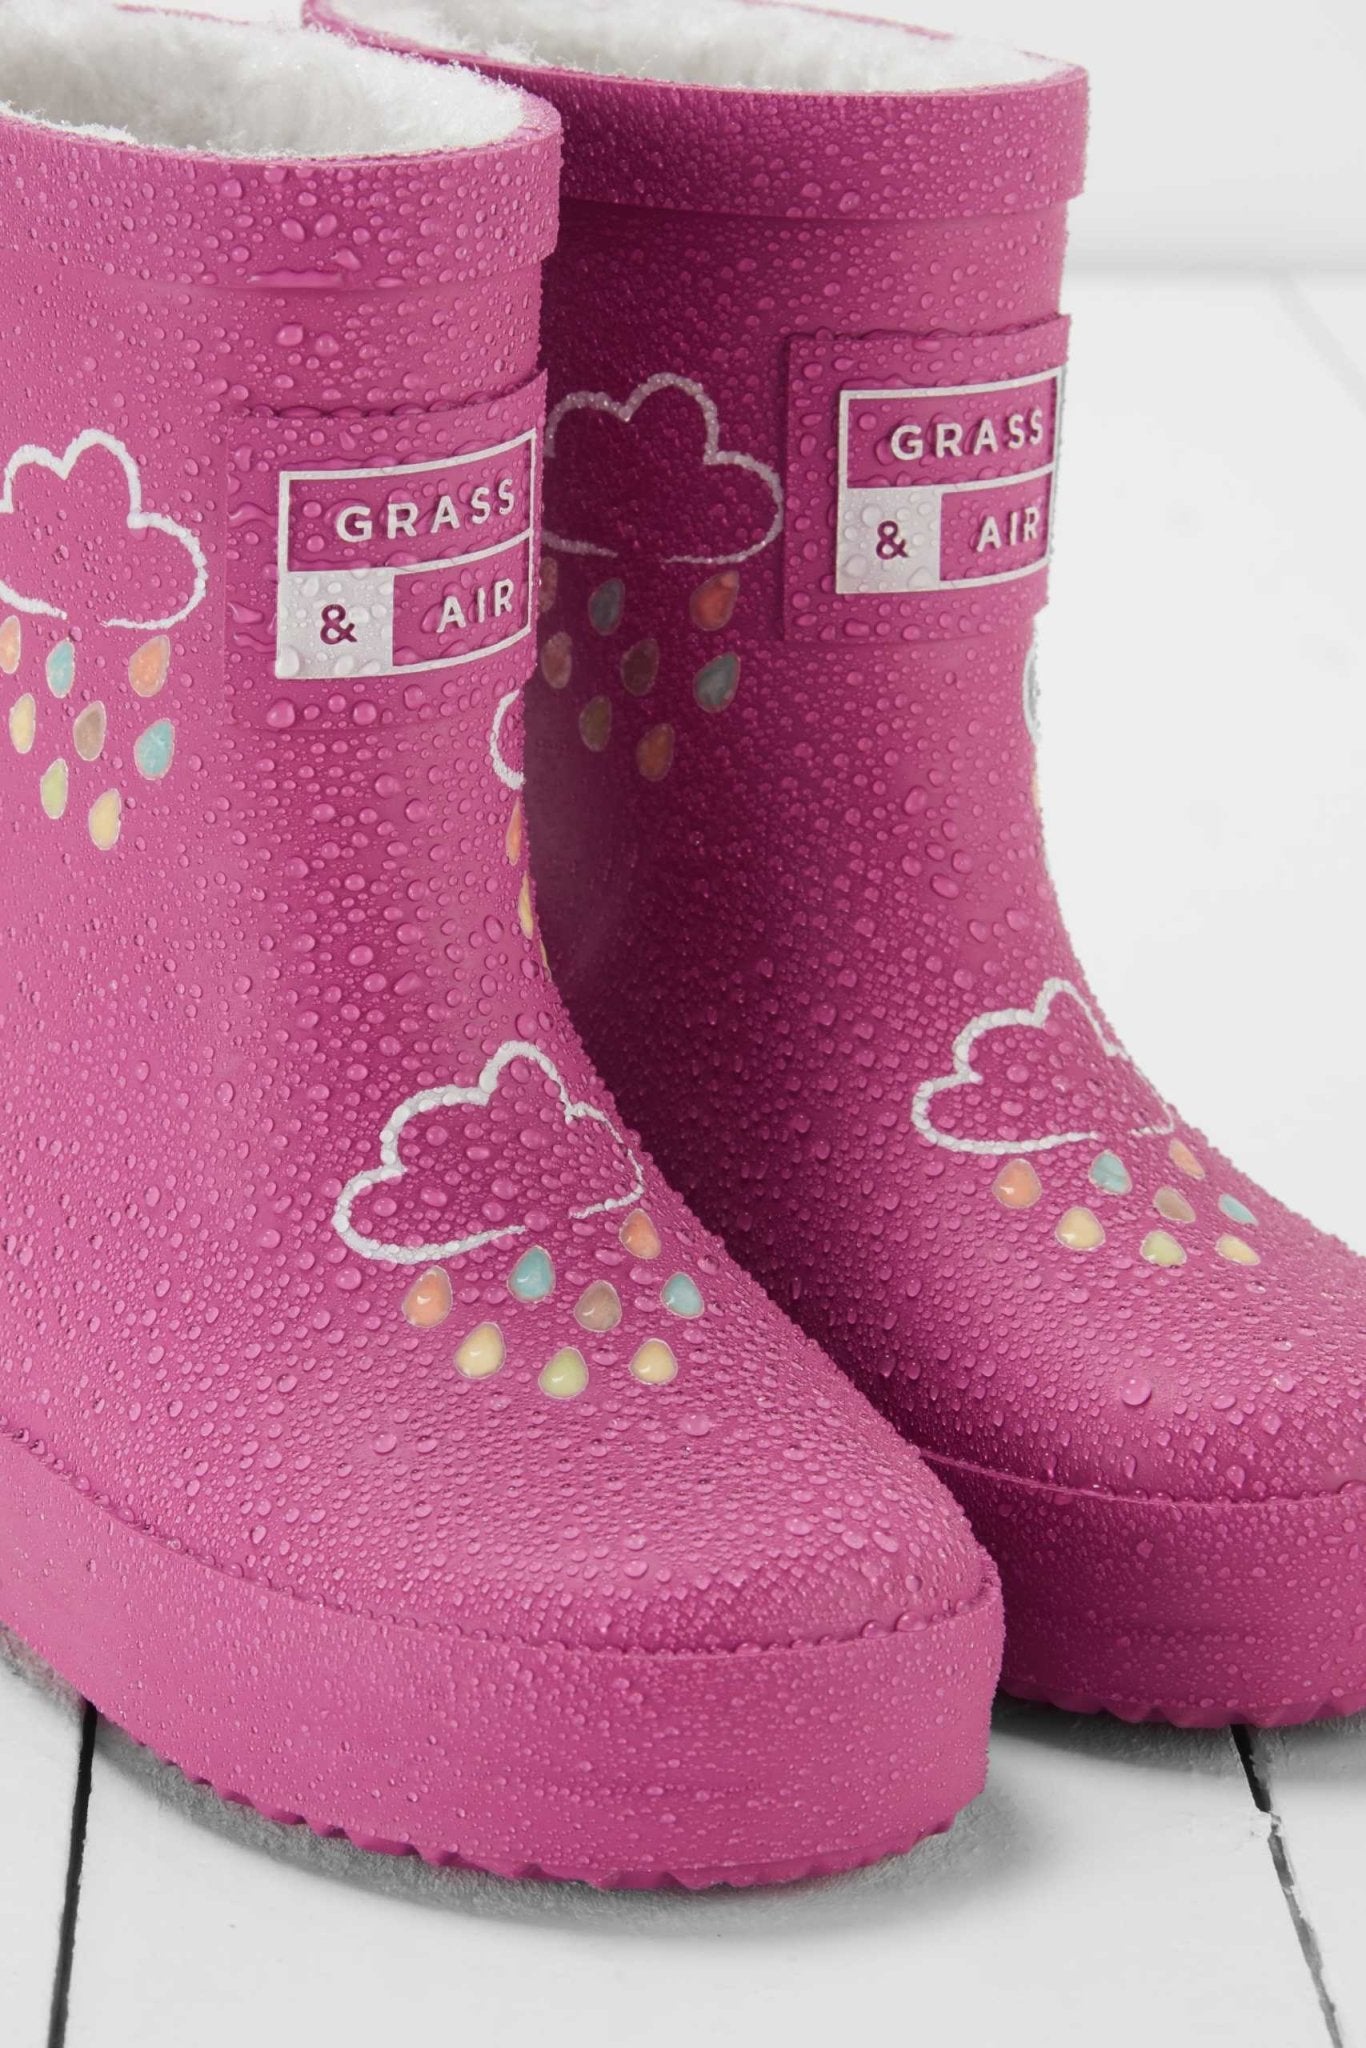 Grass & Air Orchid Pink Colour-Changing Kids Wellies